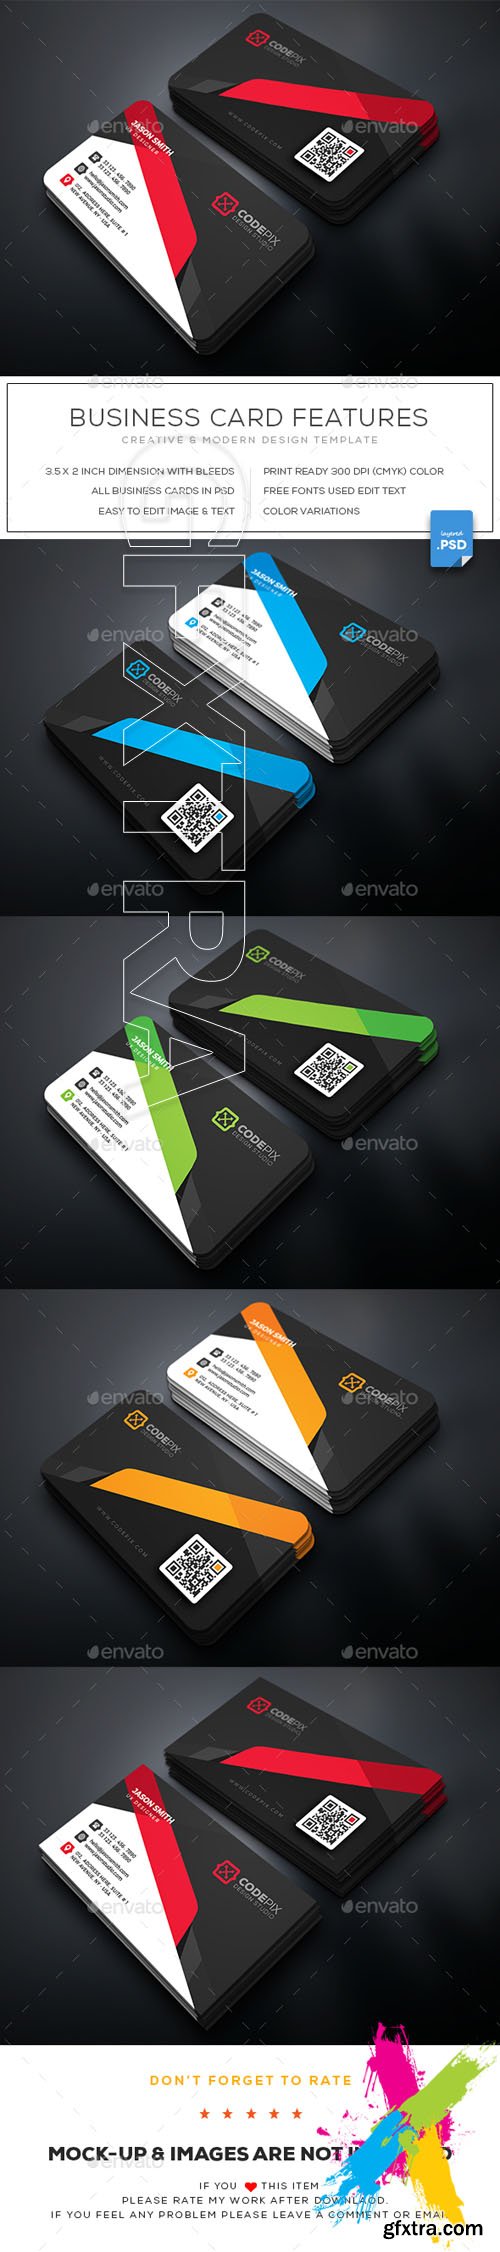 Graphicriver - Business Card 20176995